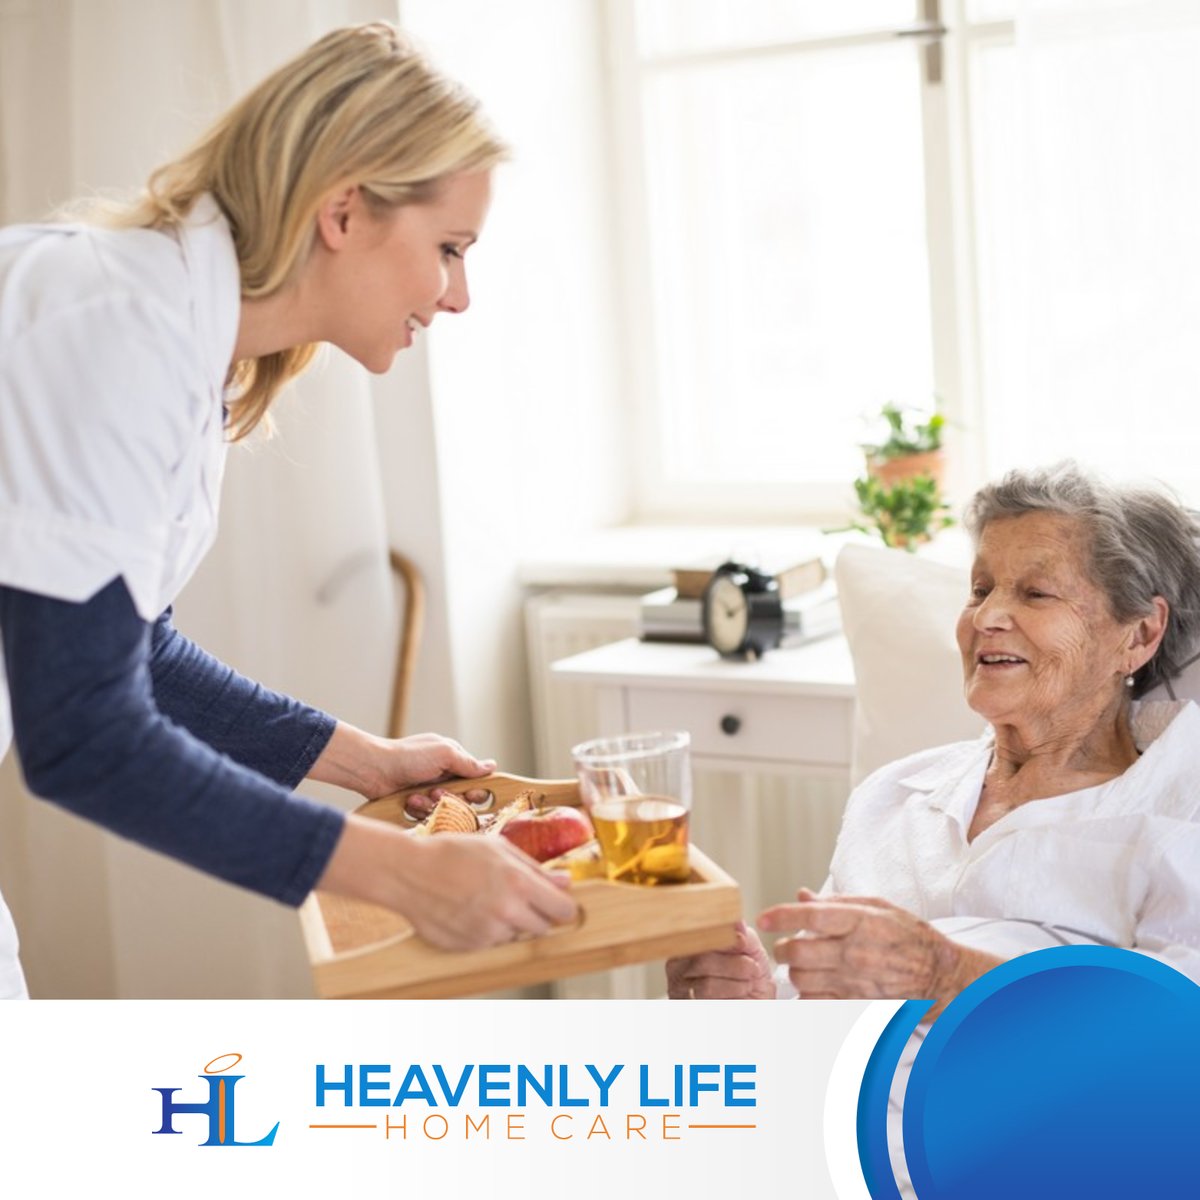 Meal Planning

Eating the right amount and kind of food suited to your age and needs is essential. When your senior loved ones or with illness is with us, we help prepare healthy meals to ensure optimum health.

#MealPreparation #HealthyMeals https://t.co/wSMmyIxICB